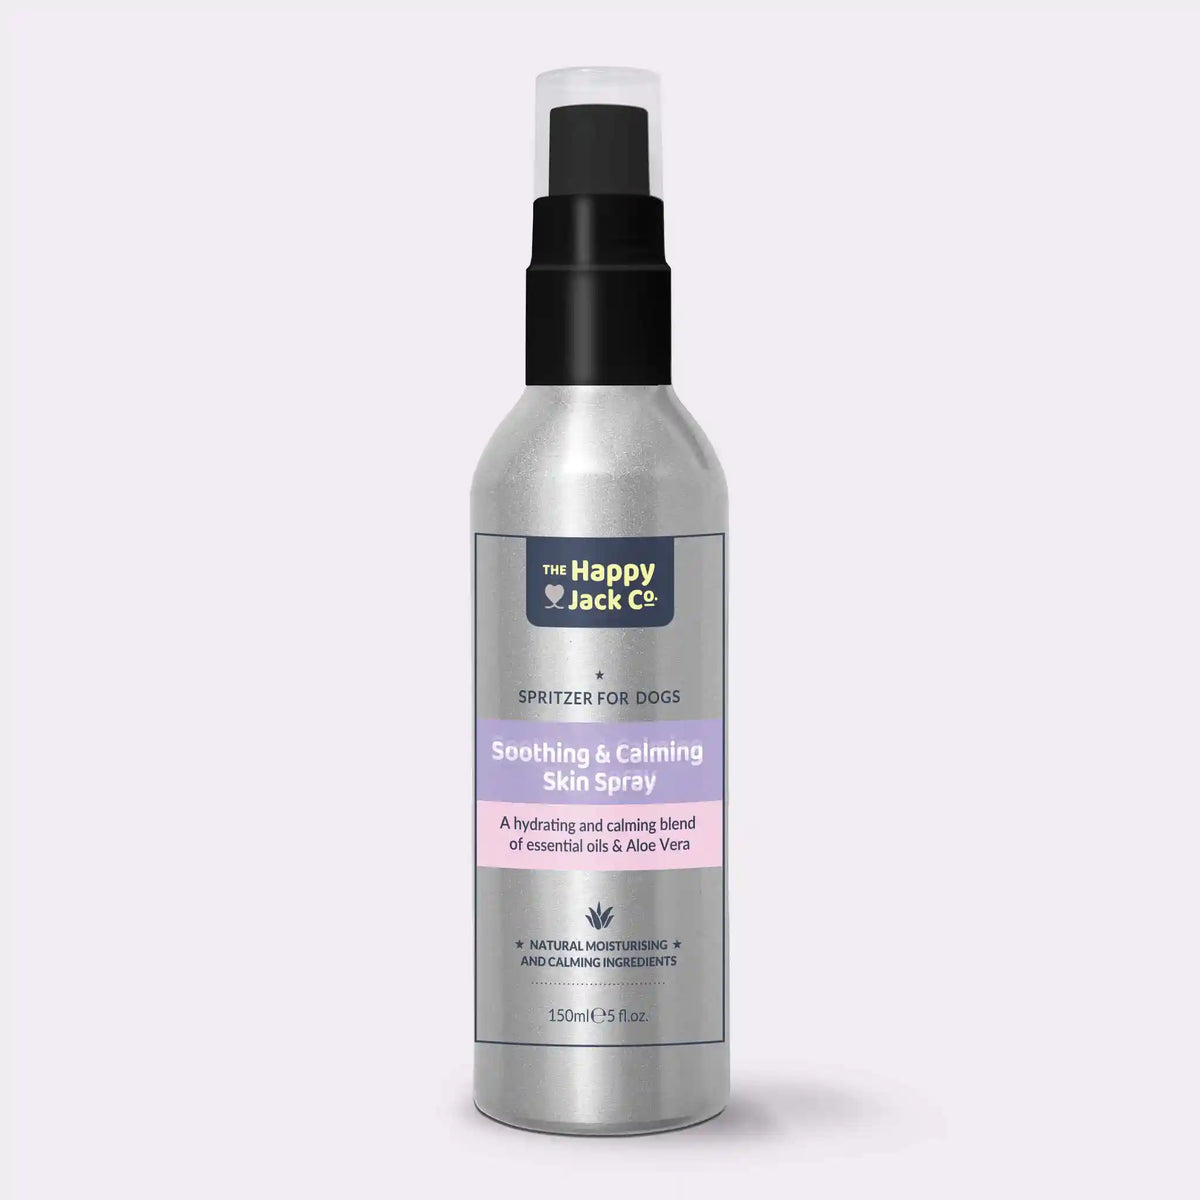 Soothing skin spray for dogs - for dogs - The Happy Jack Co